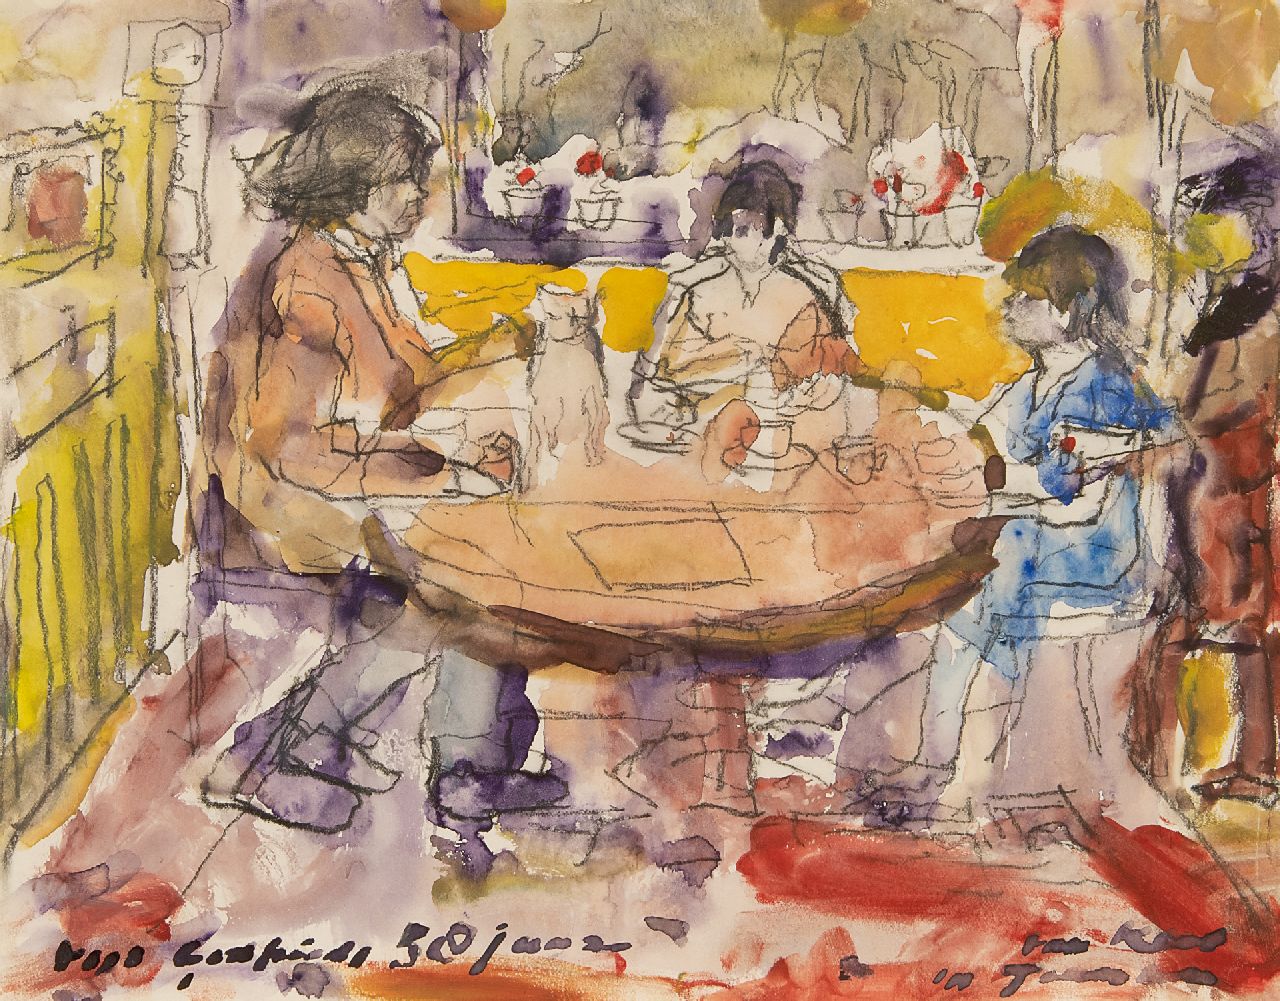 Verwey K.  | Kees Verwey | Watercolours and drawings offered for sale | Godfried and Pietsie Bomans with their daughter at the table, chalk and watercolour on paper 24.0 x 30.5 cm, signed l.r. and painted ca. 1971